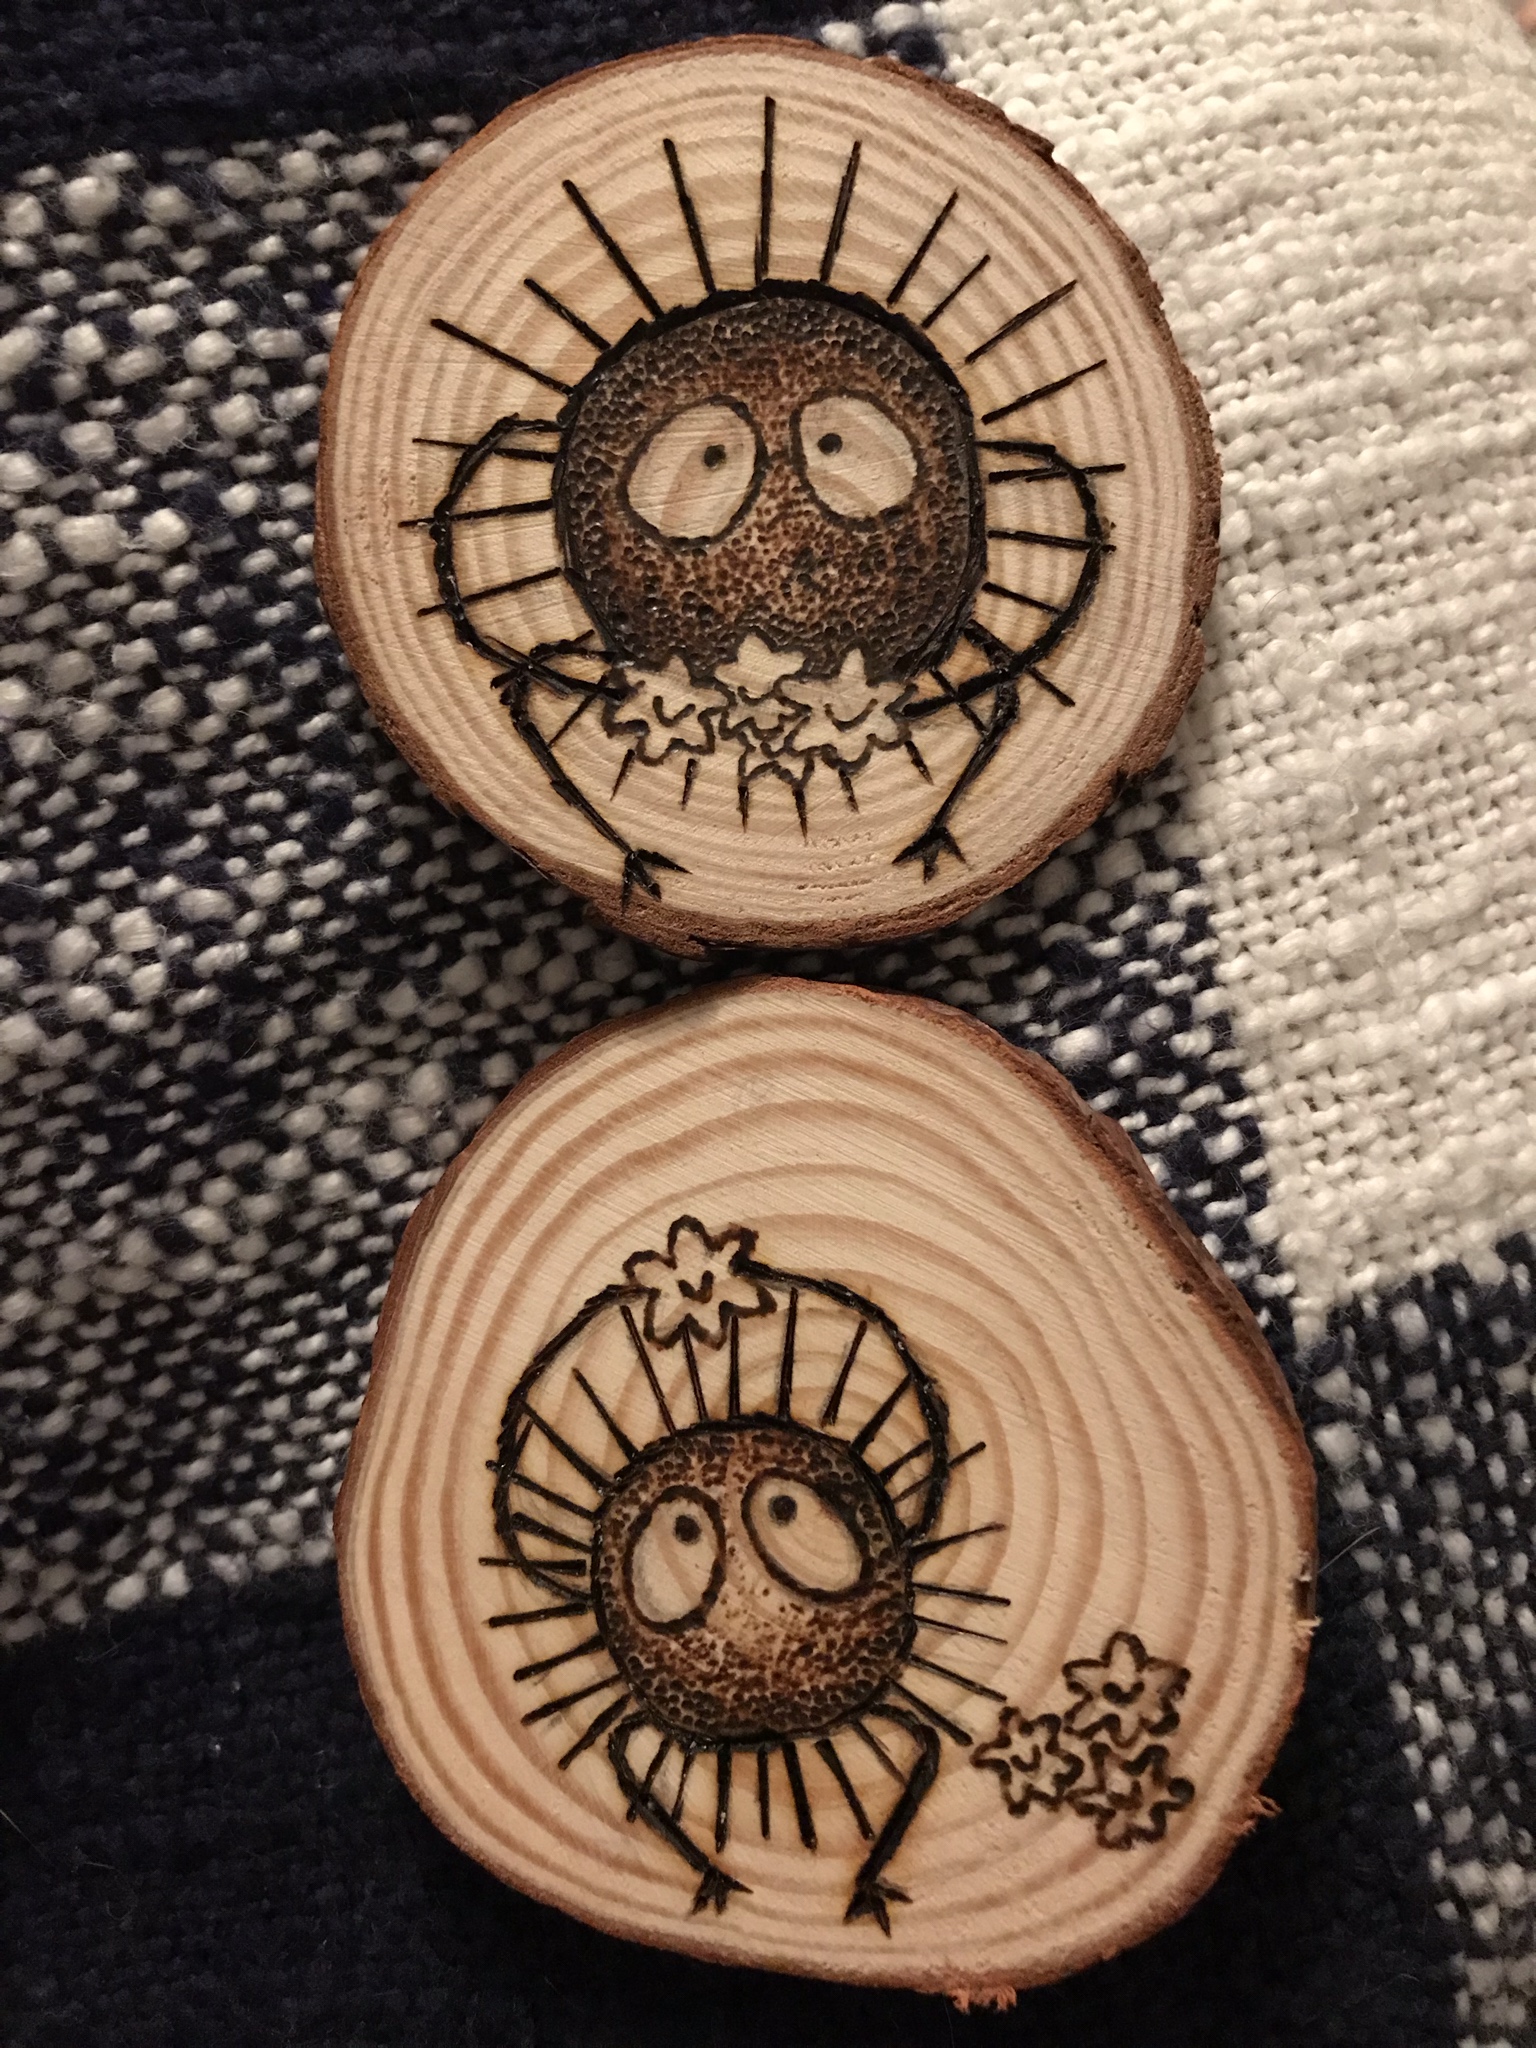 work meme of the soot sprites from Spirited Away carved into wood